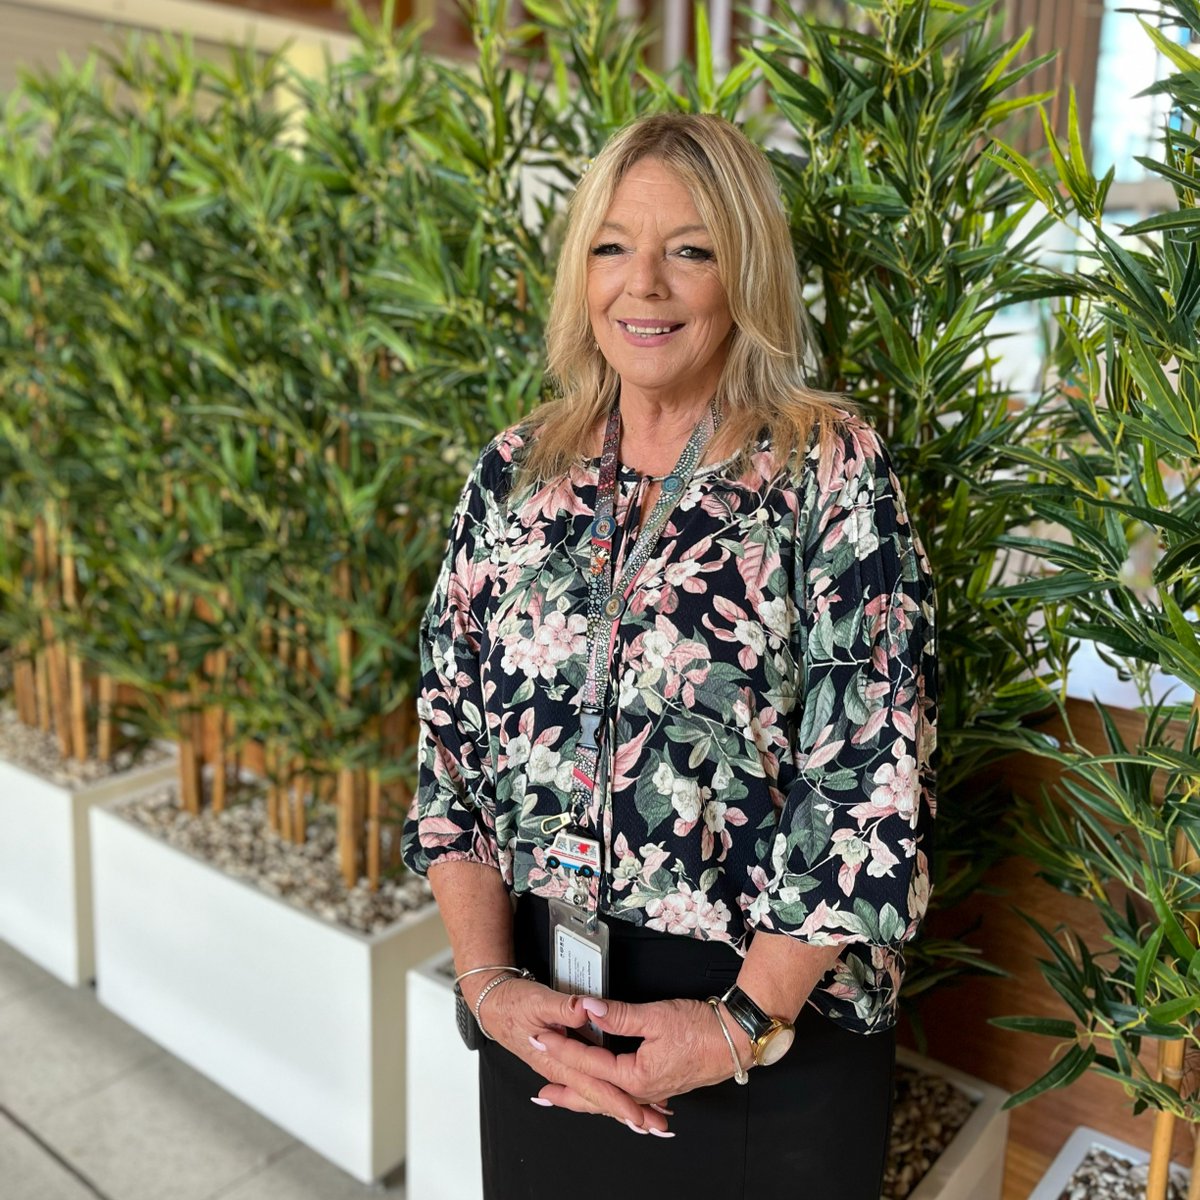 Nurse Unit Manager, Helena Anne Moore, says excitement is building as the team prepares to open the Robina Hospital Transfer Unit next month. It will provide a specialised space to improve patient flow and increase access for patients, loved ones, and Queensland Ambulance Service